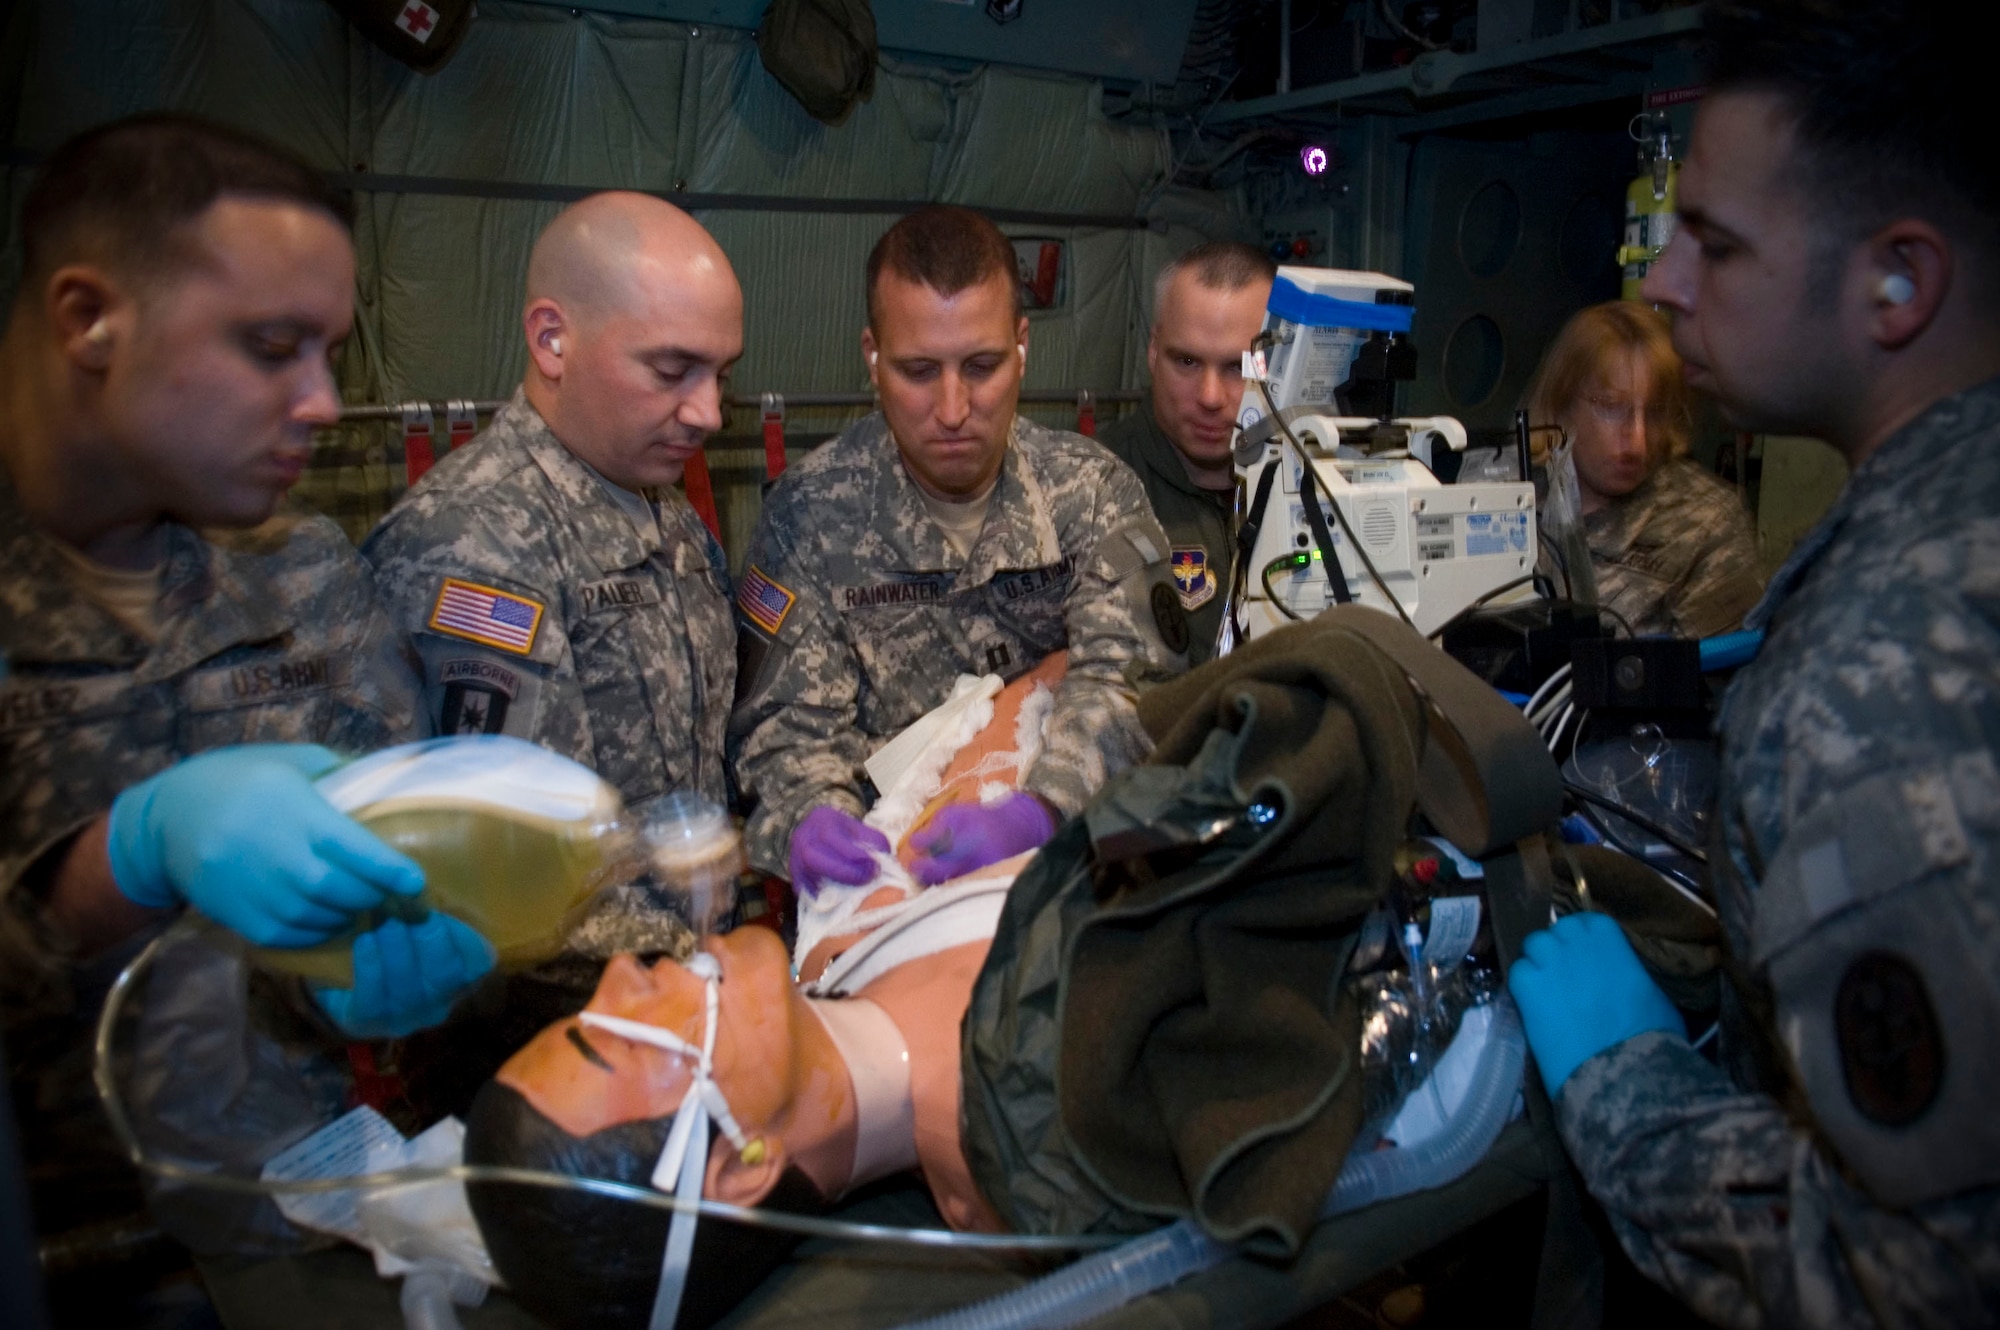 Special Medical Augmentation Response Team members based at Brooke Army Medical Center, San Antonio, Texas care for a simulated burn patient inside a C-130 aircraft simulator at Brooks City-Base, also in San Antonio. The training is part of Critical Care Air Transport Team training conducted by the United States School of Aerospace Medicine at Brooks. (U.S. Air Force photo/Steve Thurow)